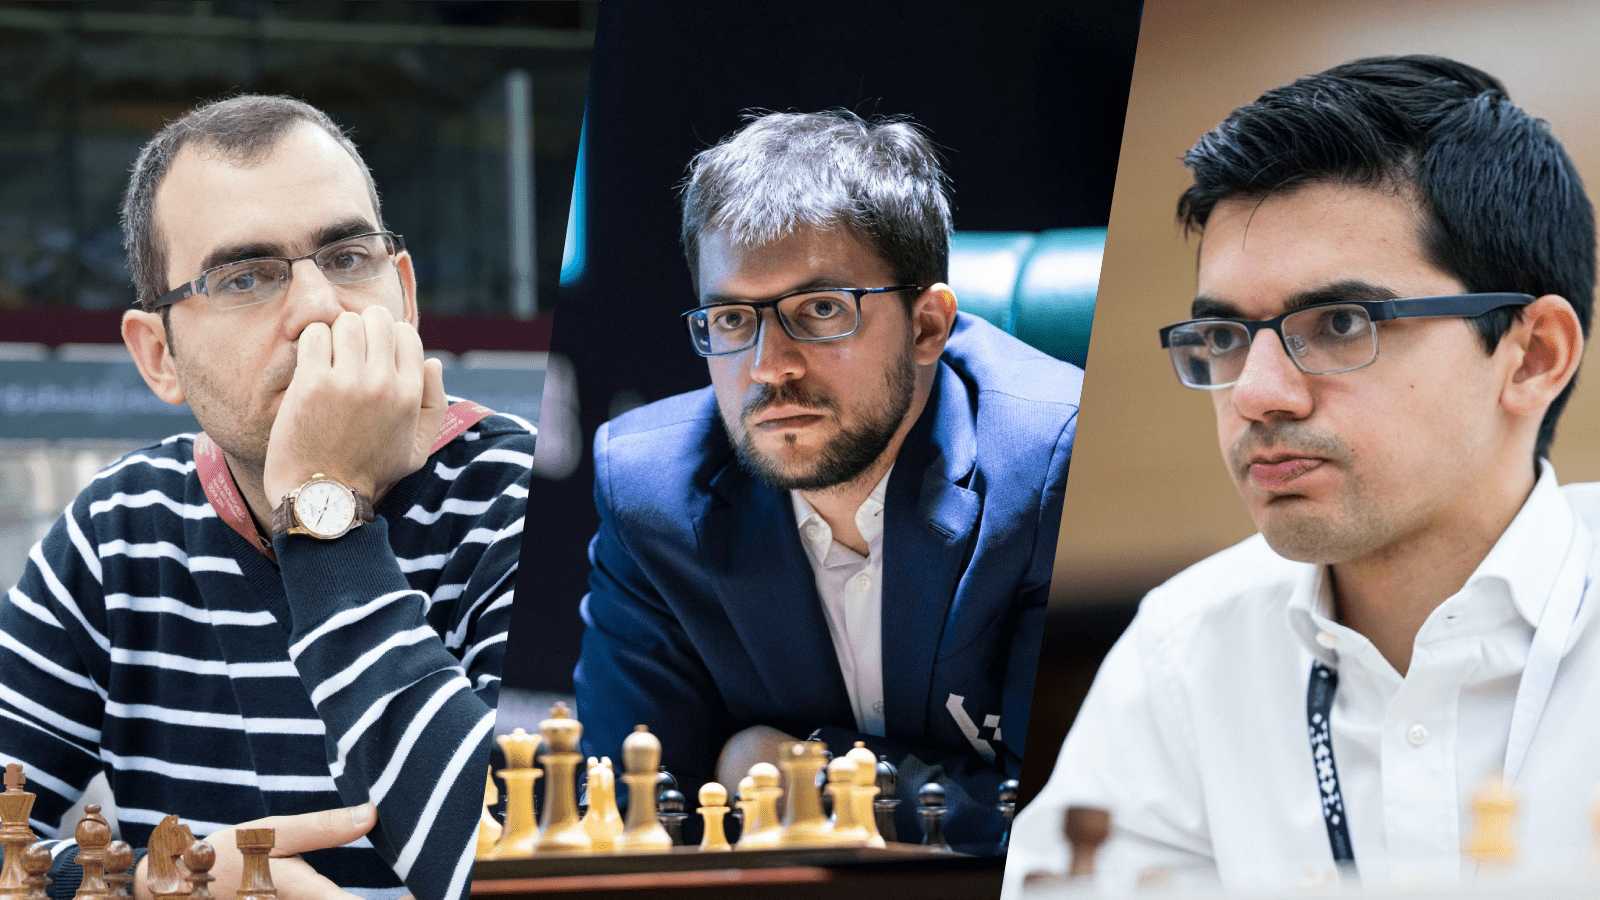 Who Will Grab The Last Two Candidates Spots In The FIDE Grand Prix? - Chess .com